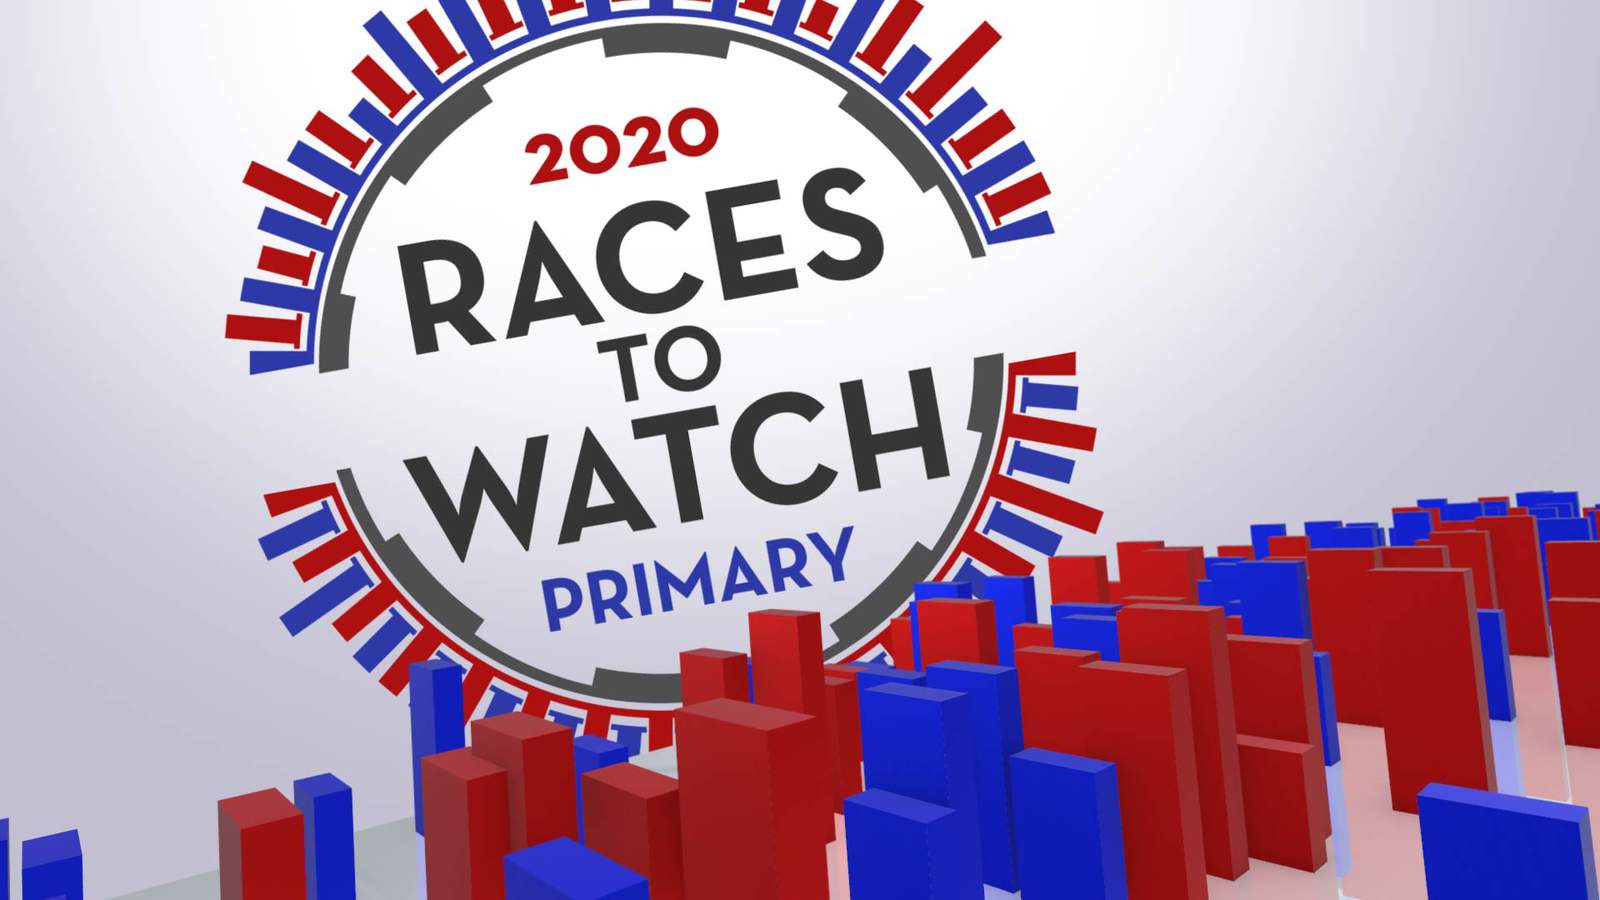 Races to watch during the primary election around San Antonio